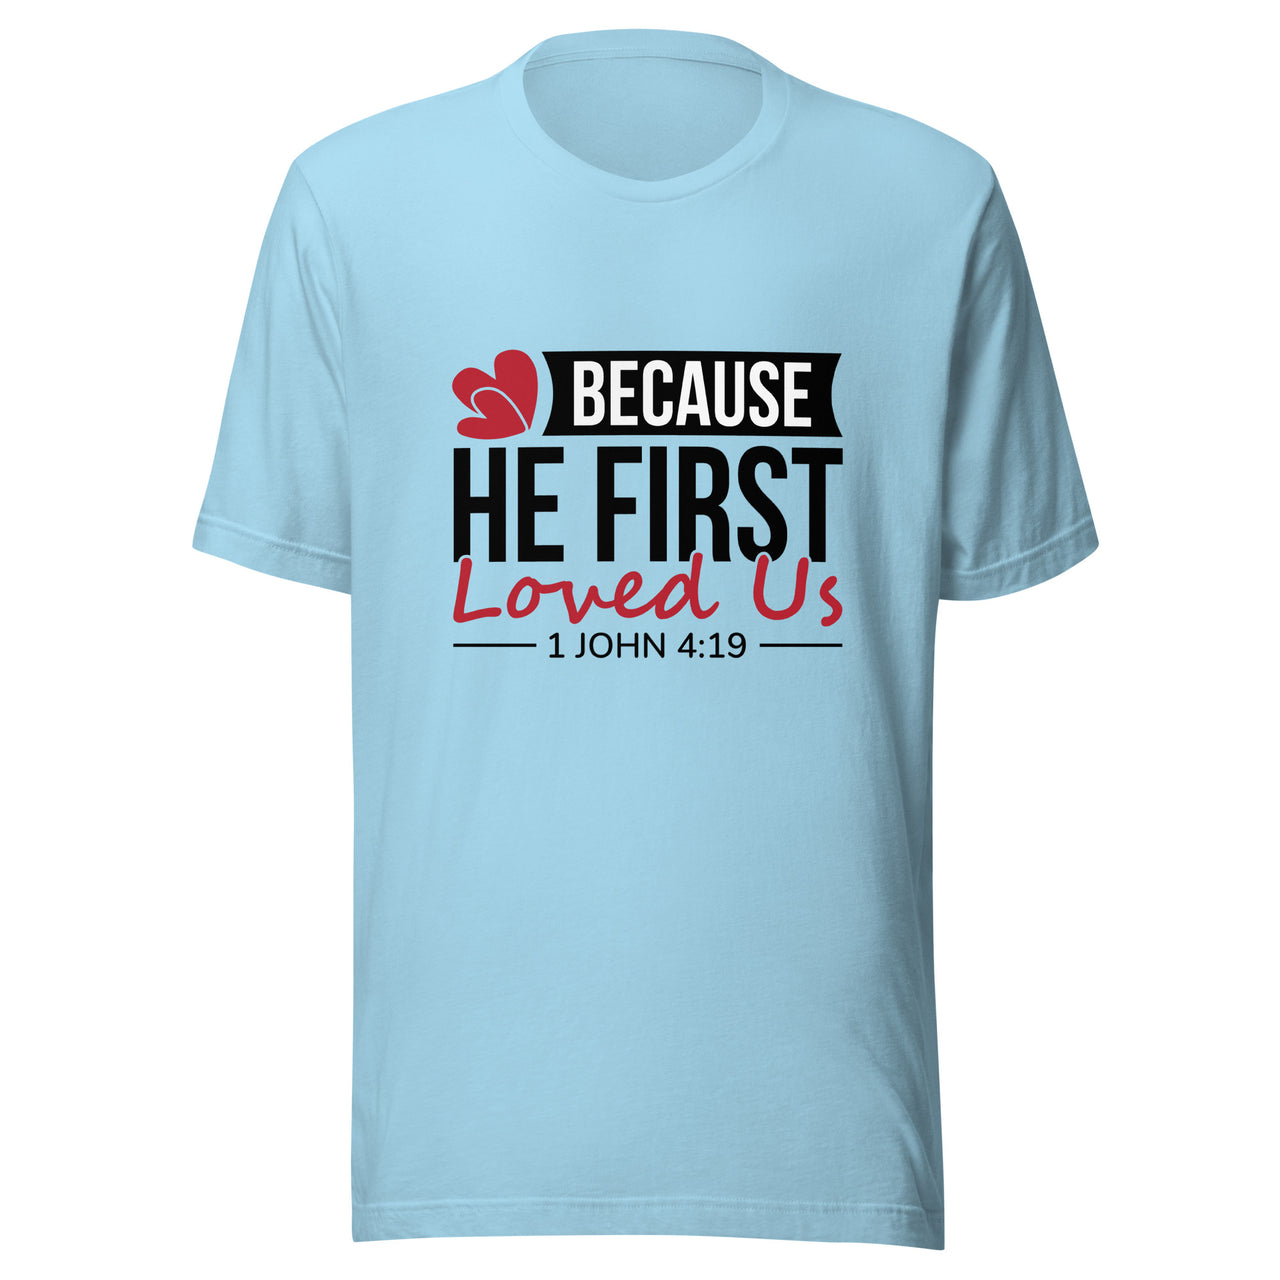 Because He First Loved Us [1 John 4:19]